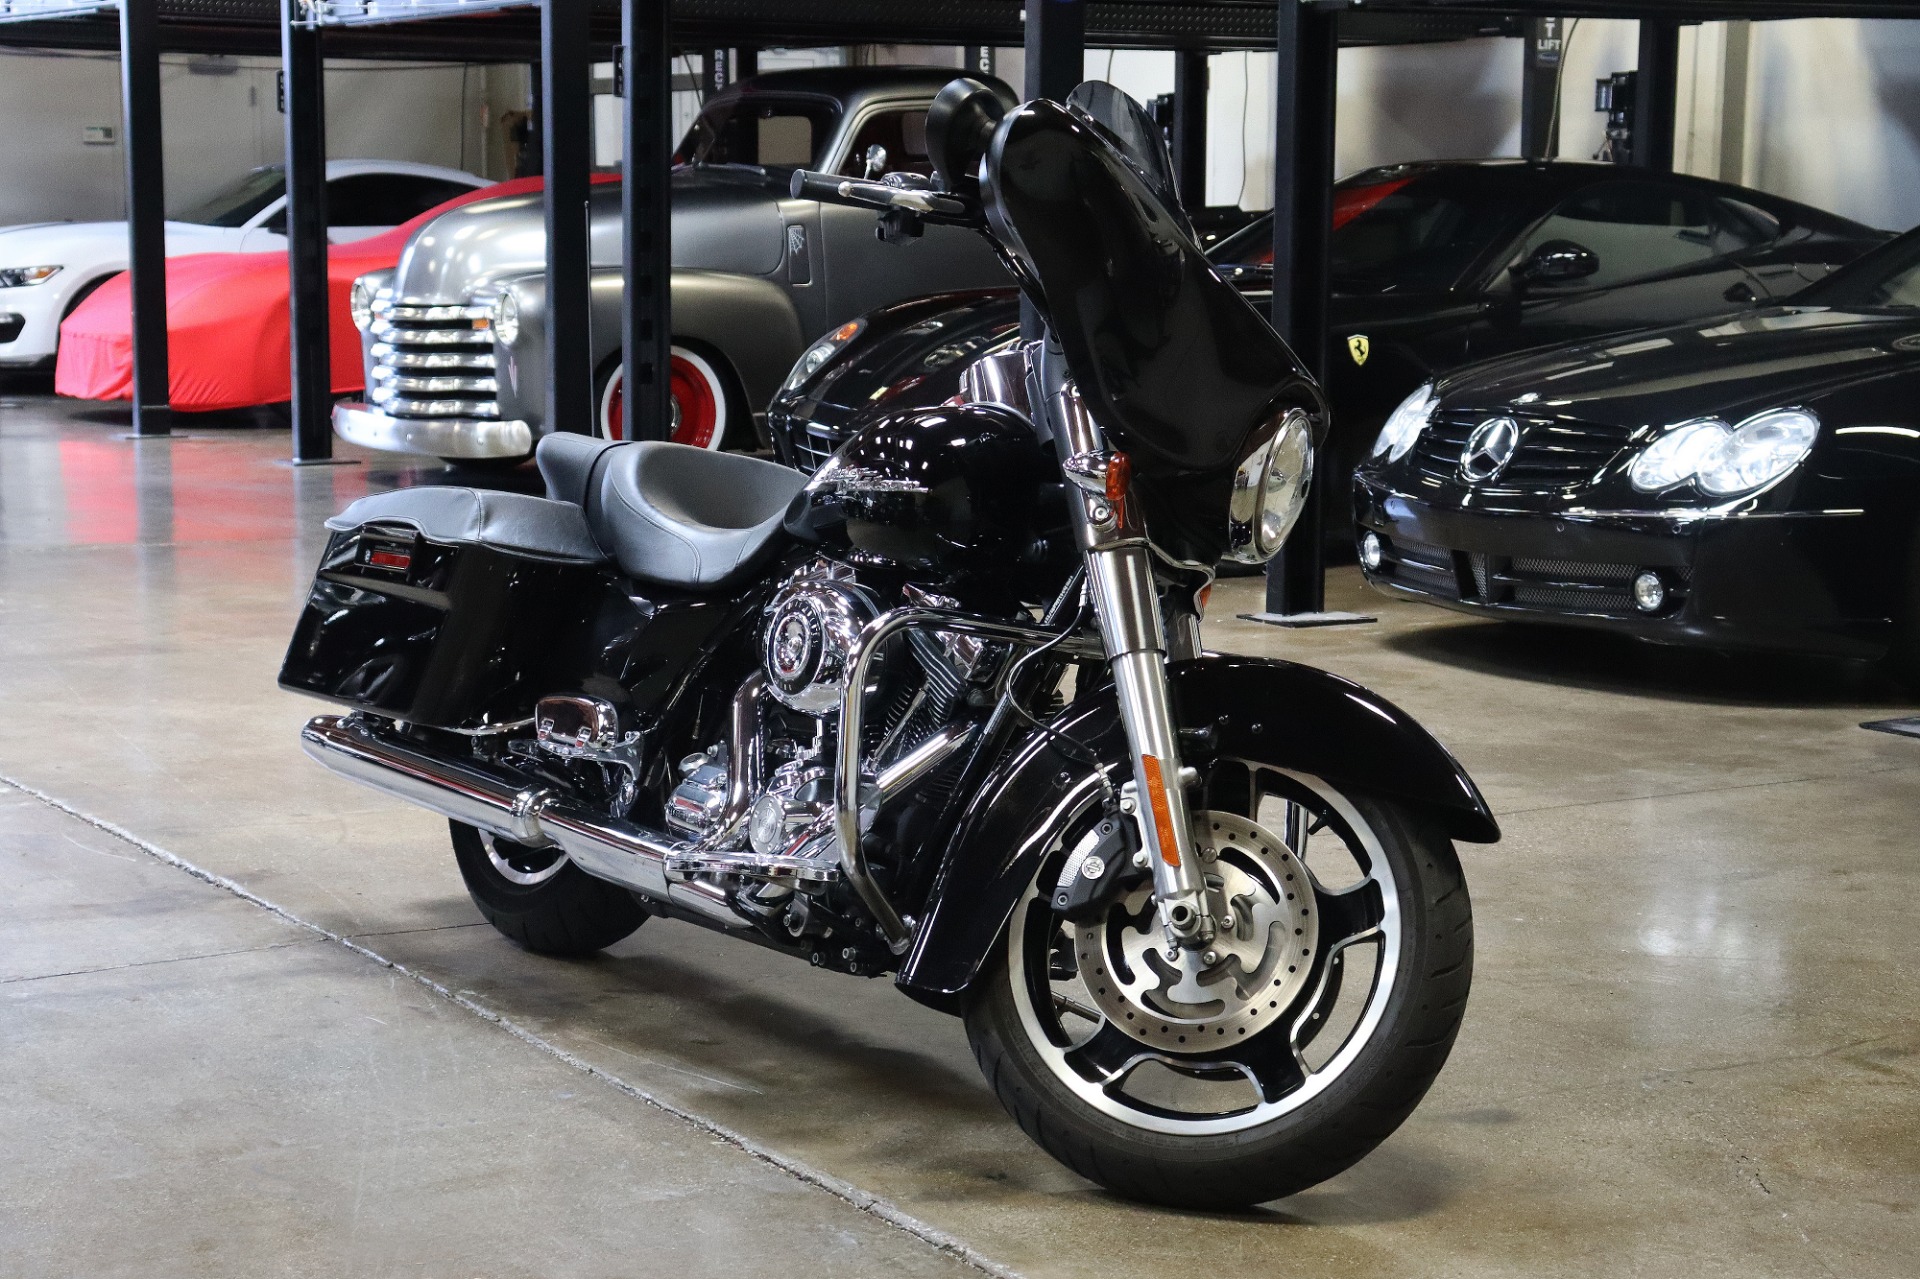 Used 2010 Harley Davidson FLHX Street Glide for sale $12,995 at San Francisco Sports Cars in San Carlos CA 94070 1